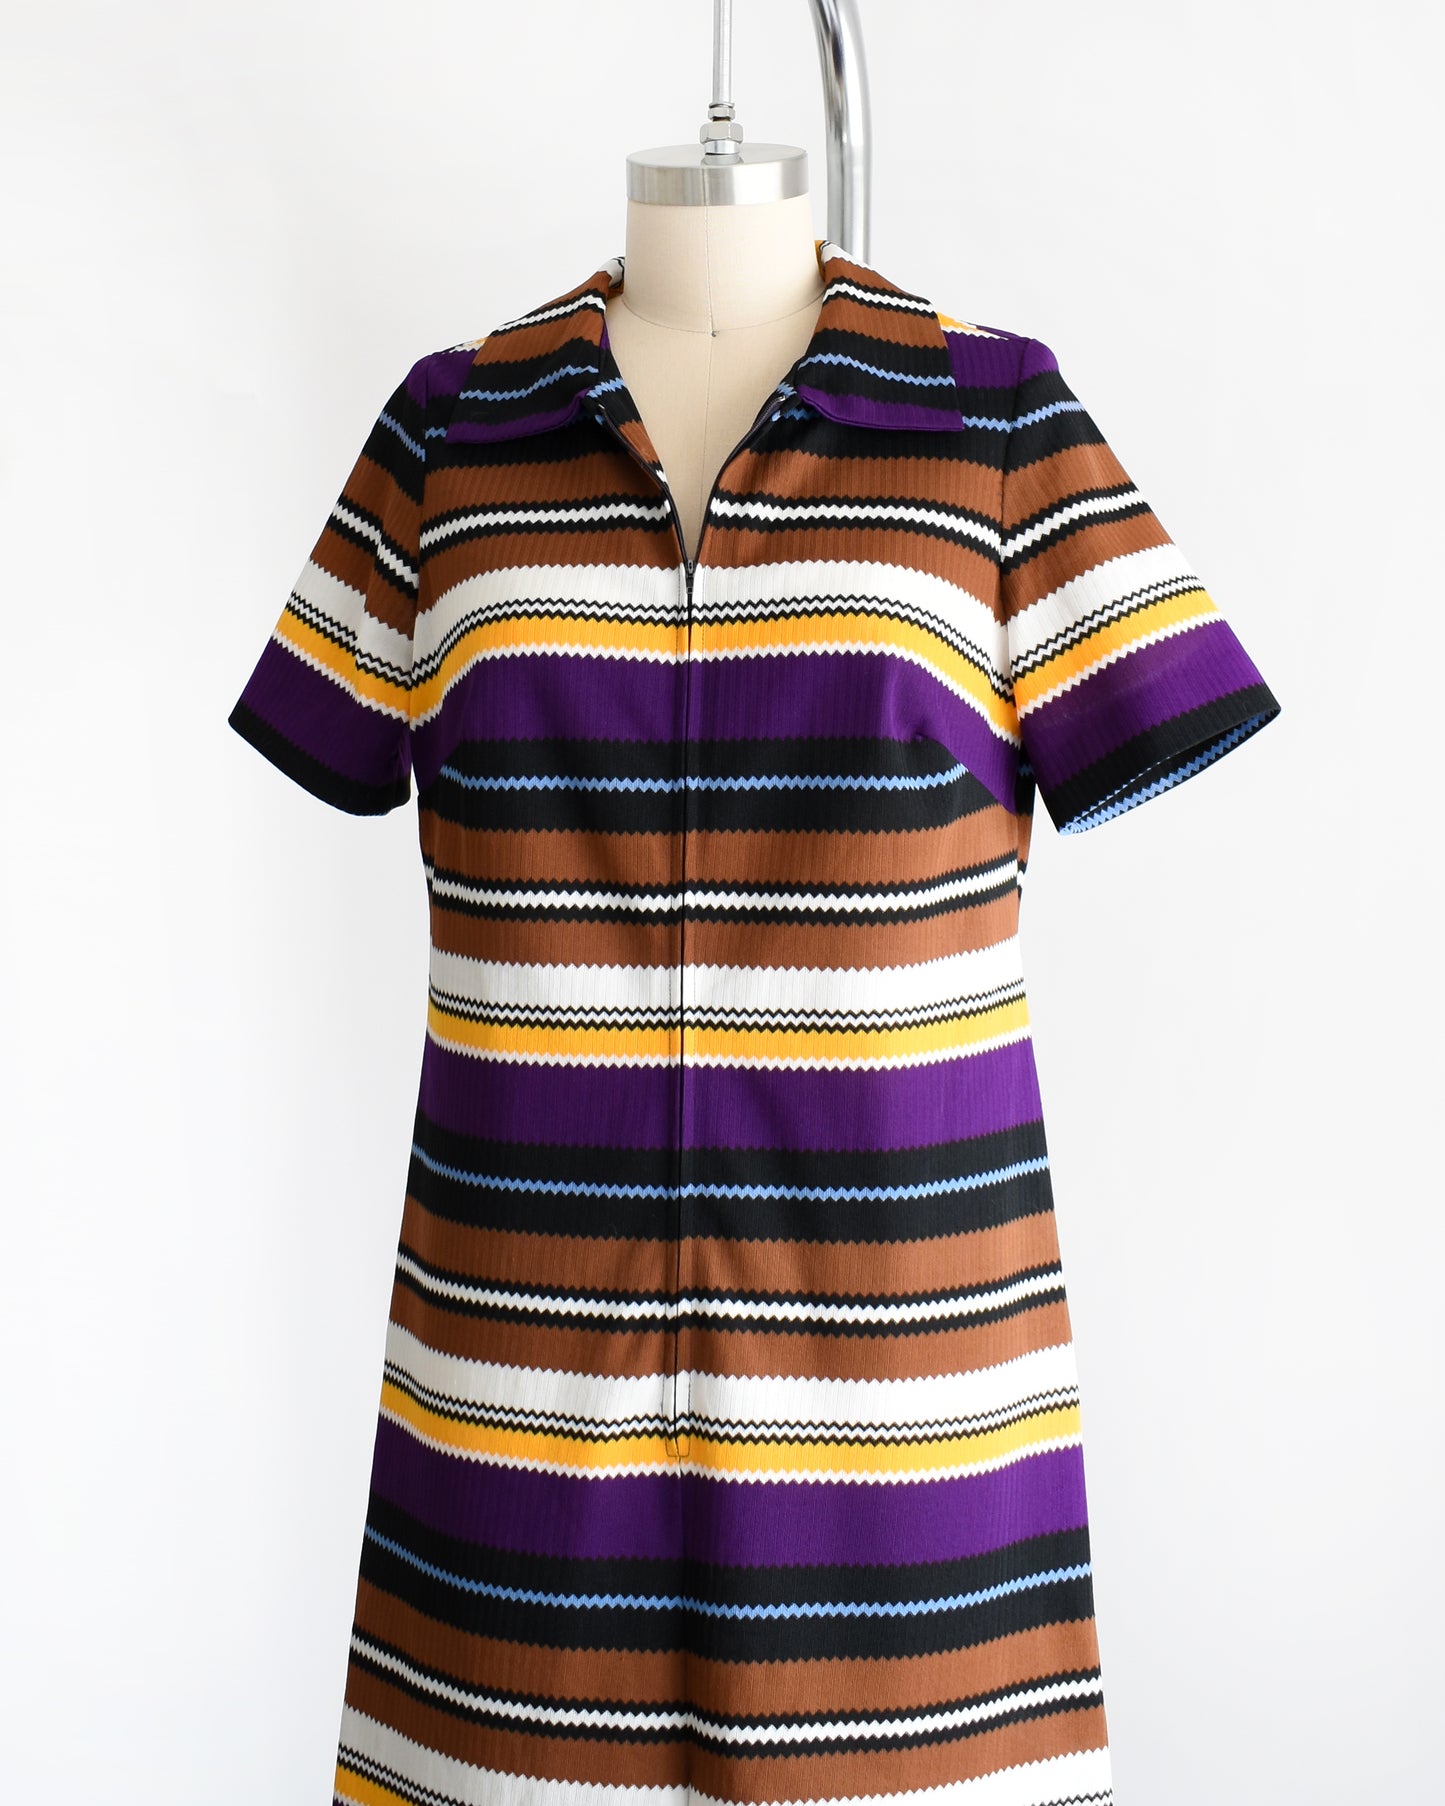 Side front view of a vintage 1970s striped mod dress that has black, brown, white, blue, yellow, and purple horizontal stripes with zigzag edges. The dress features a zipper down the front which is unzipped a little bit in this photo.